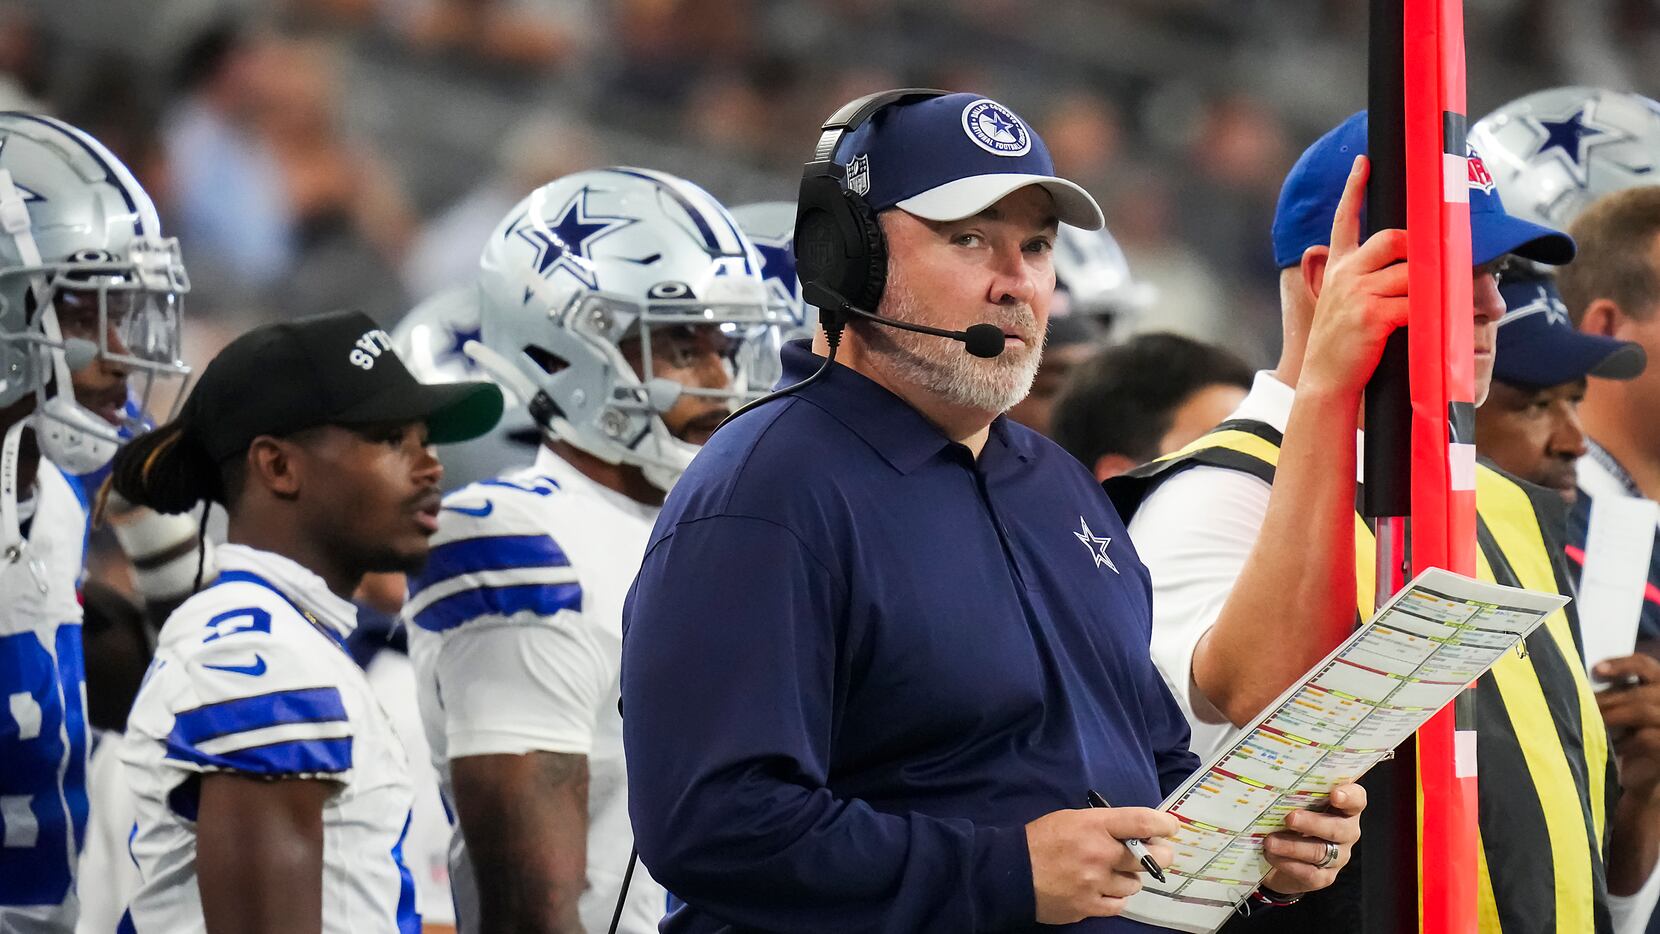 Cowboys' Mike McCarthy doesn't mind fighting. Just don't throw